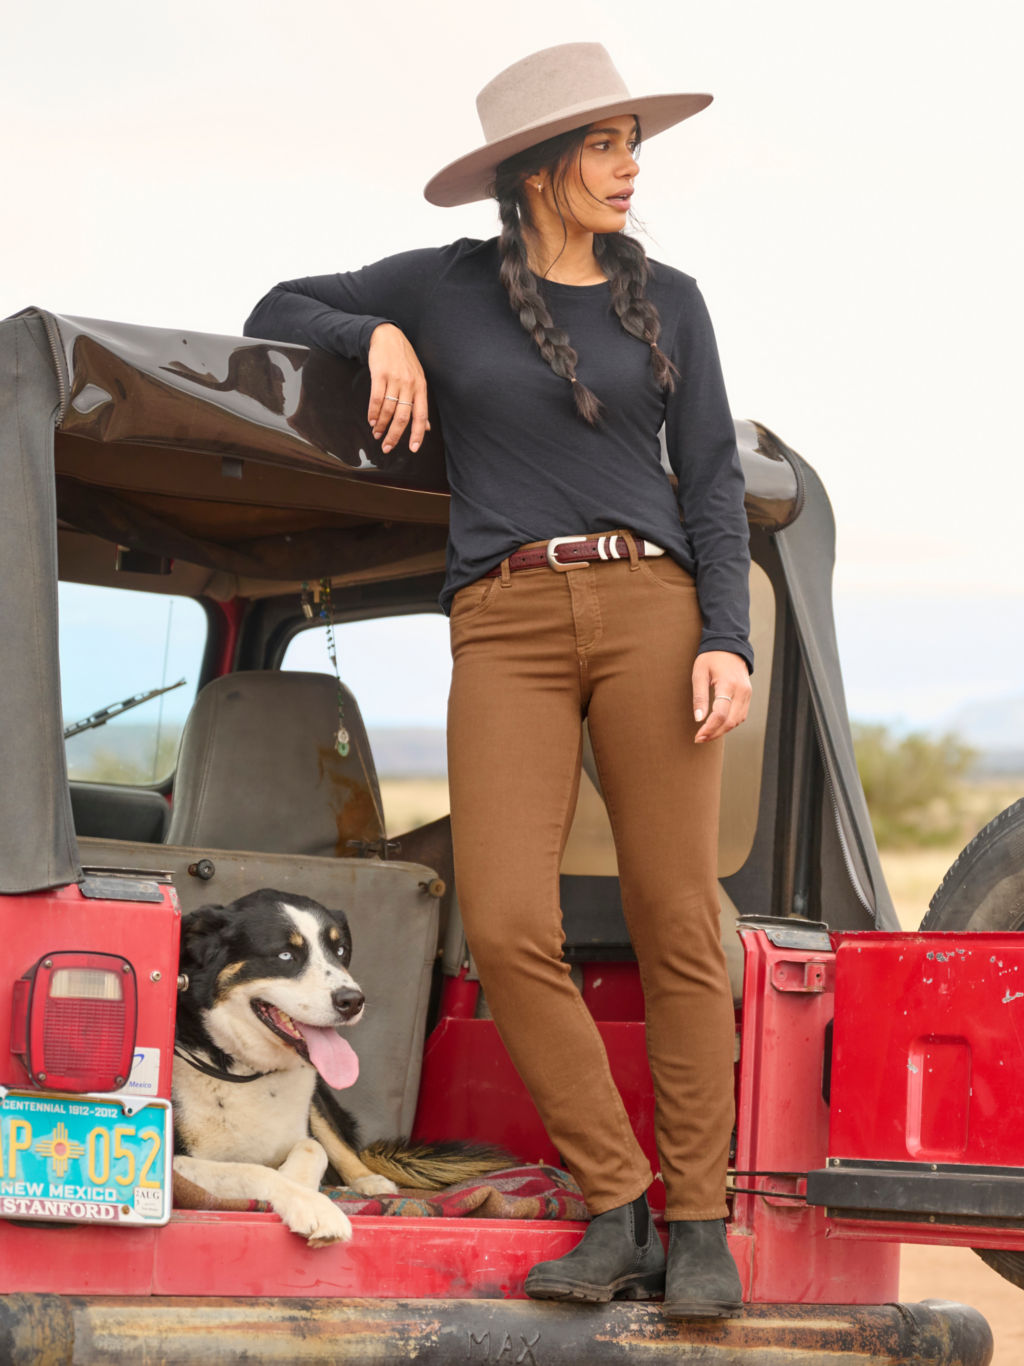 A woman stands on the rusty bumper of a red jeep while a black and white dog lays next to her.